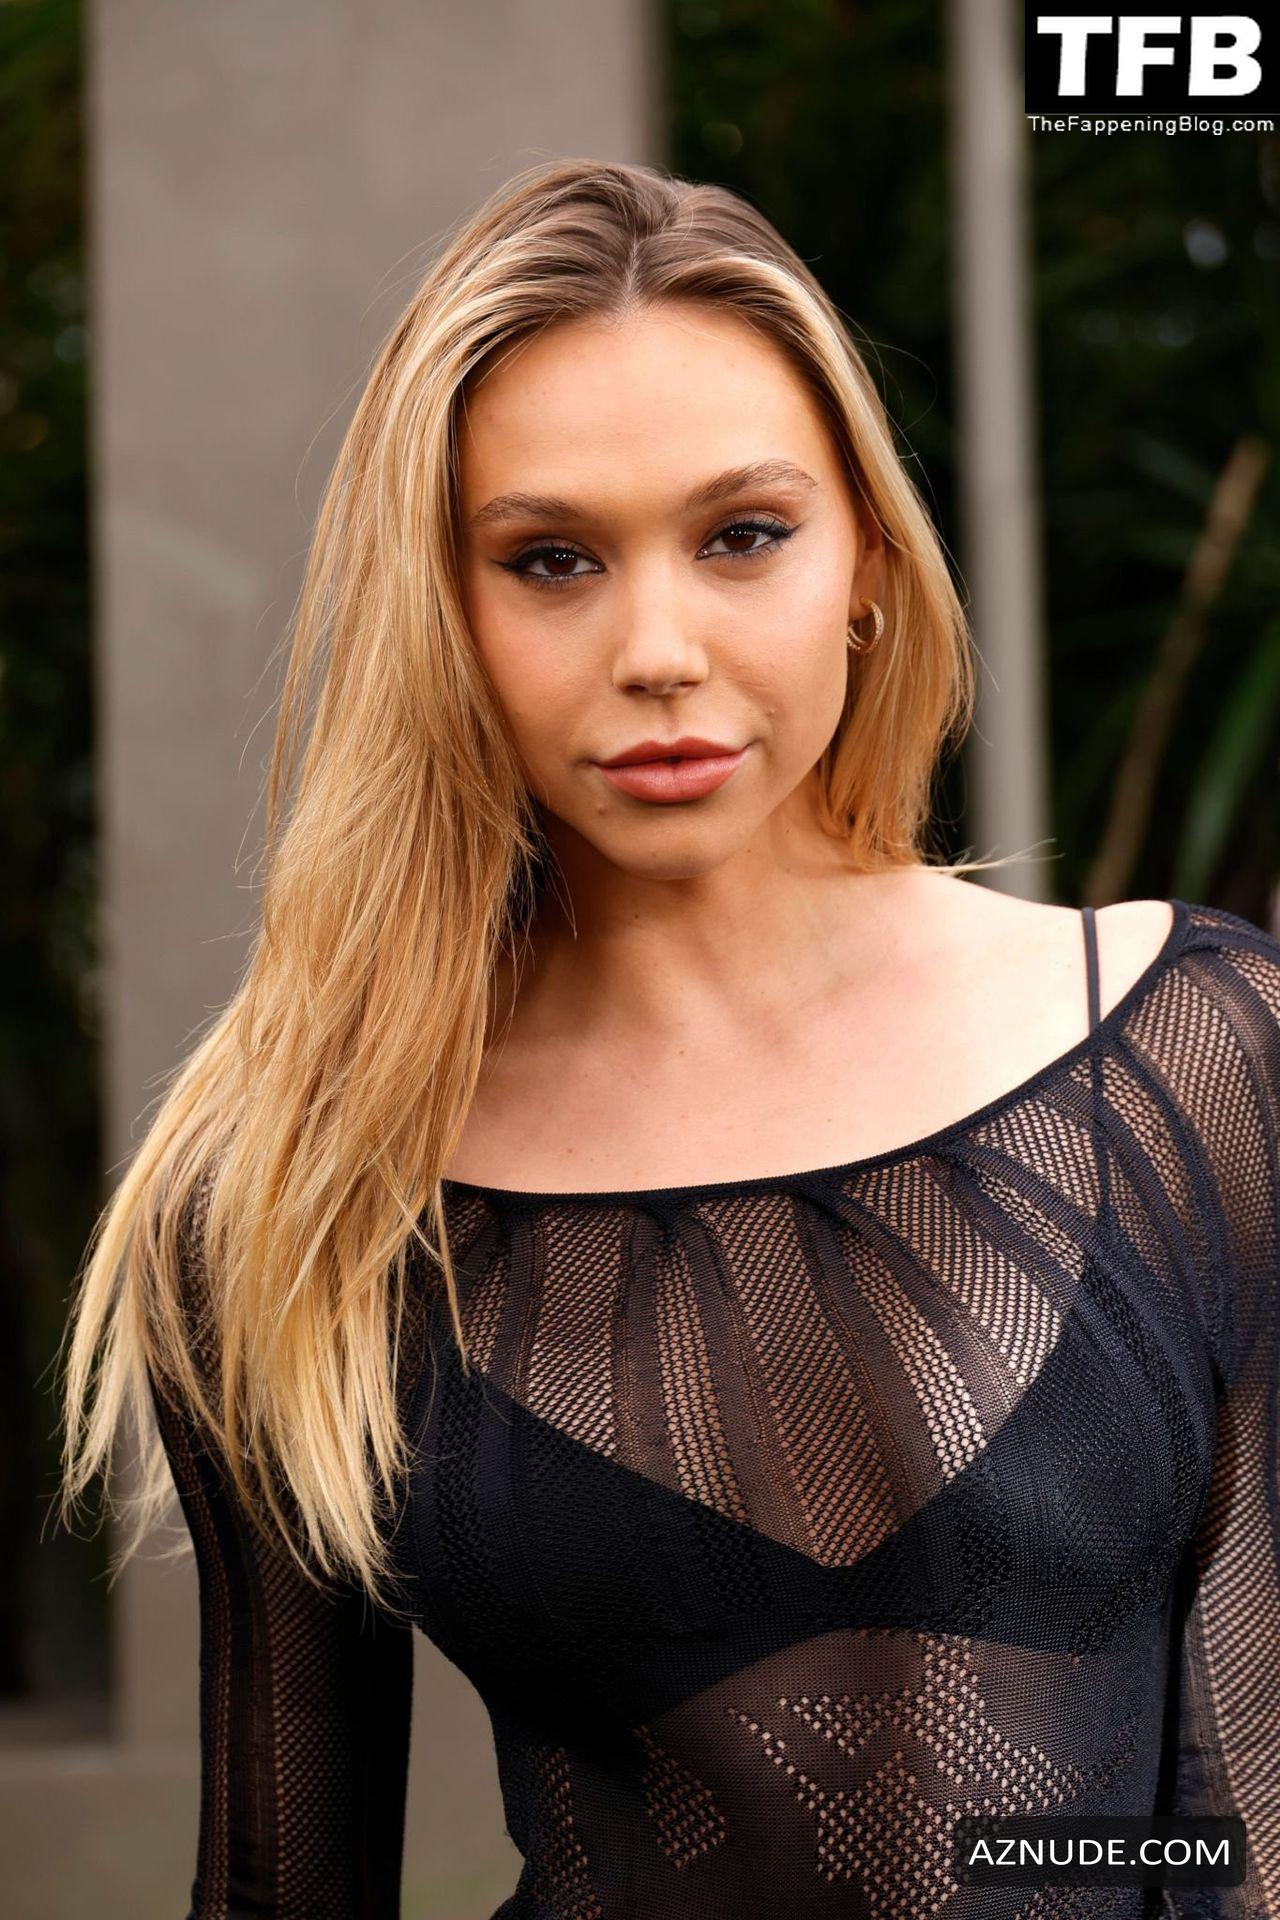 Alexis Ren Sexy Seen Flaunting Her Hot Figure Wearing A See Through Dress At The Jurassic World